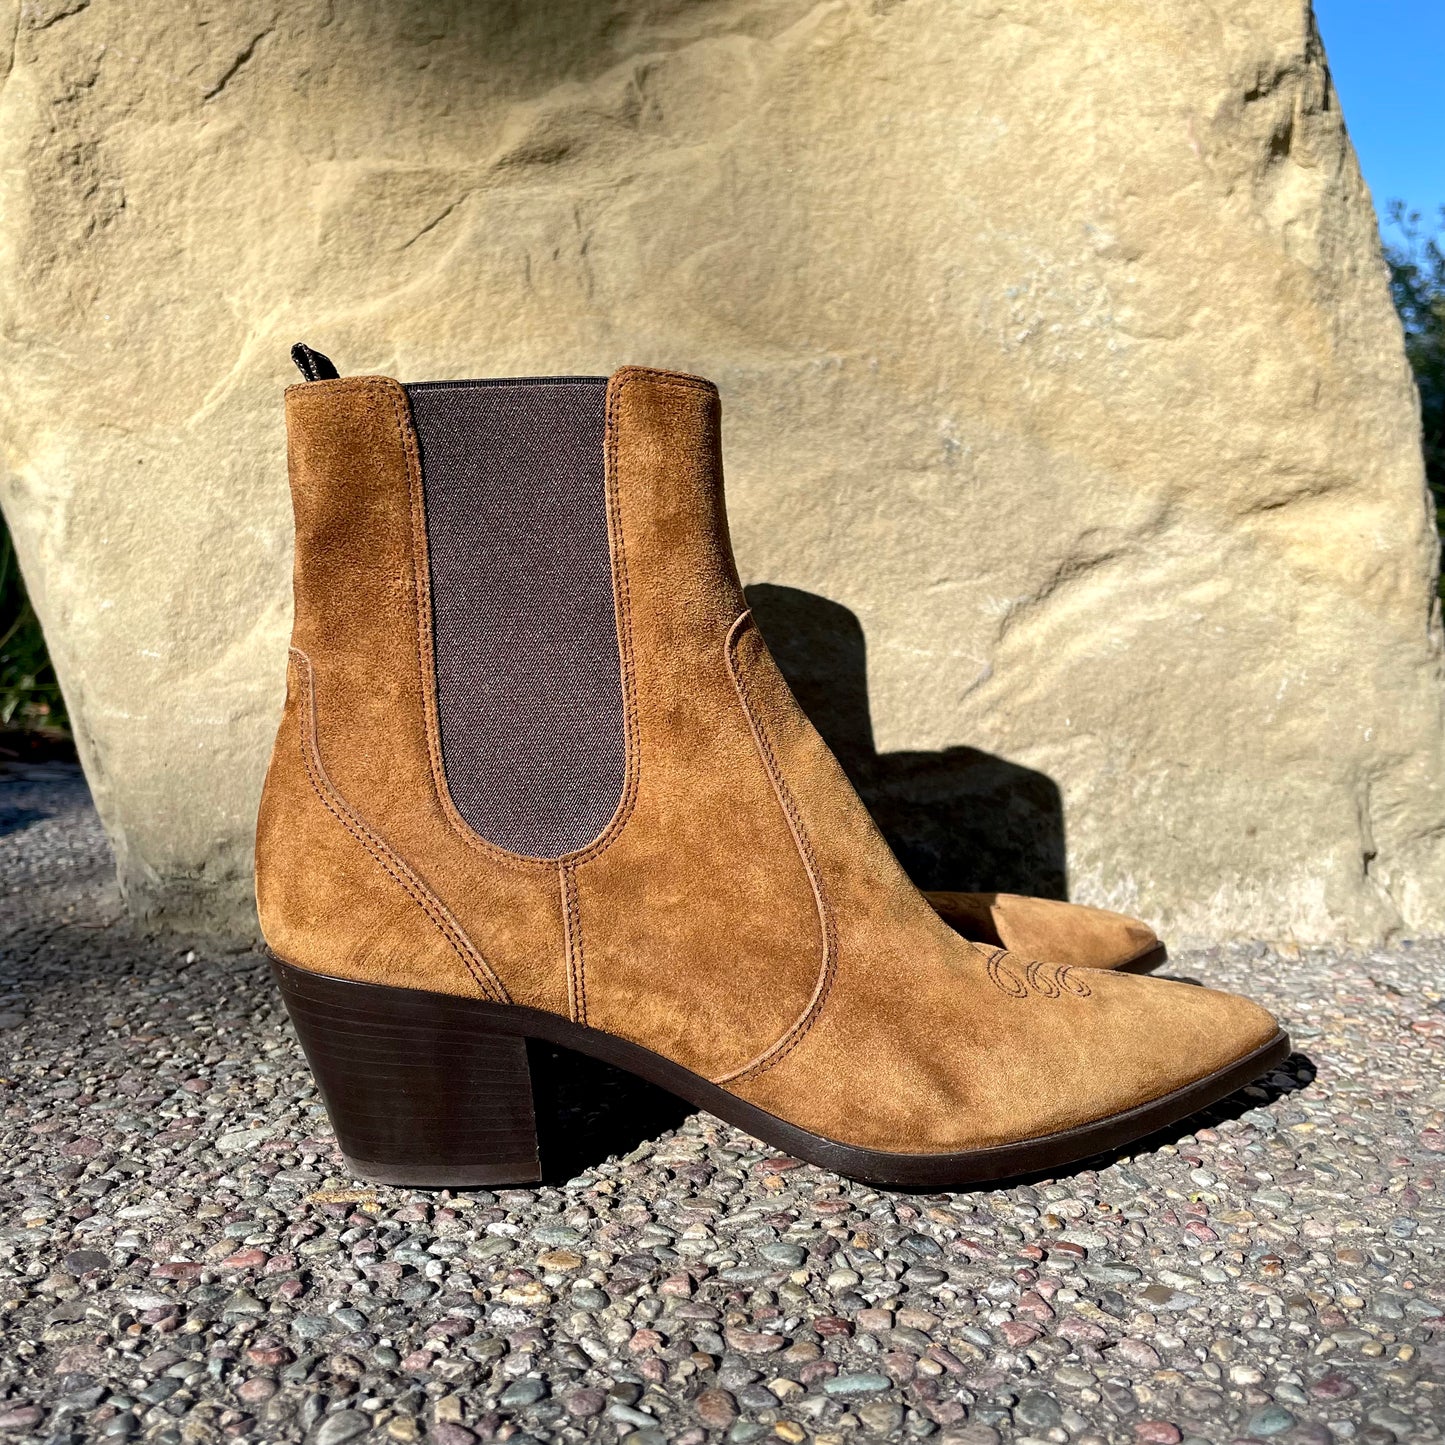 Gianvito Rossi Suede Boots